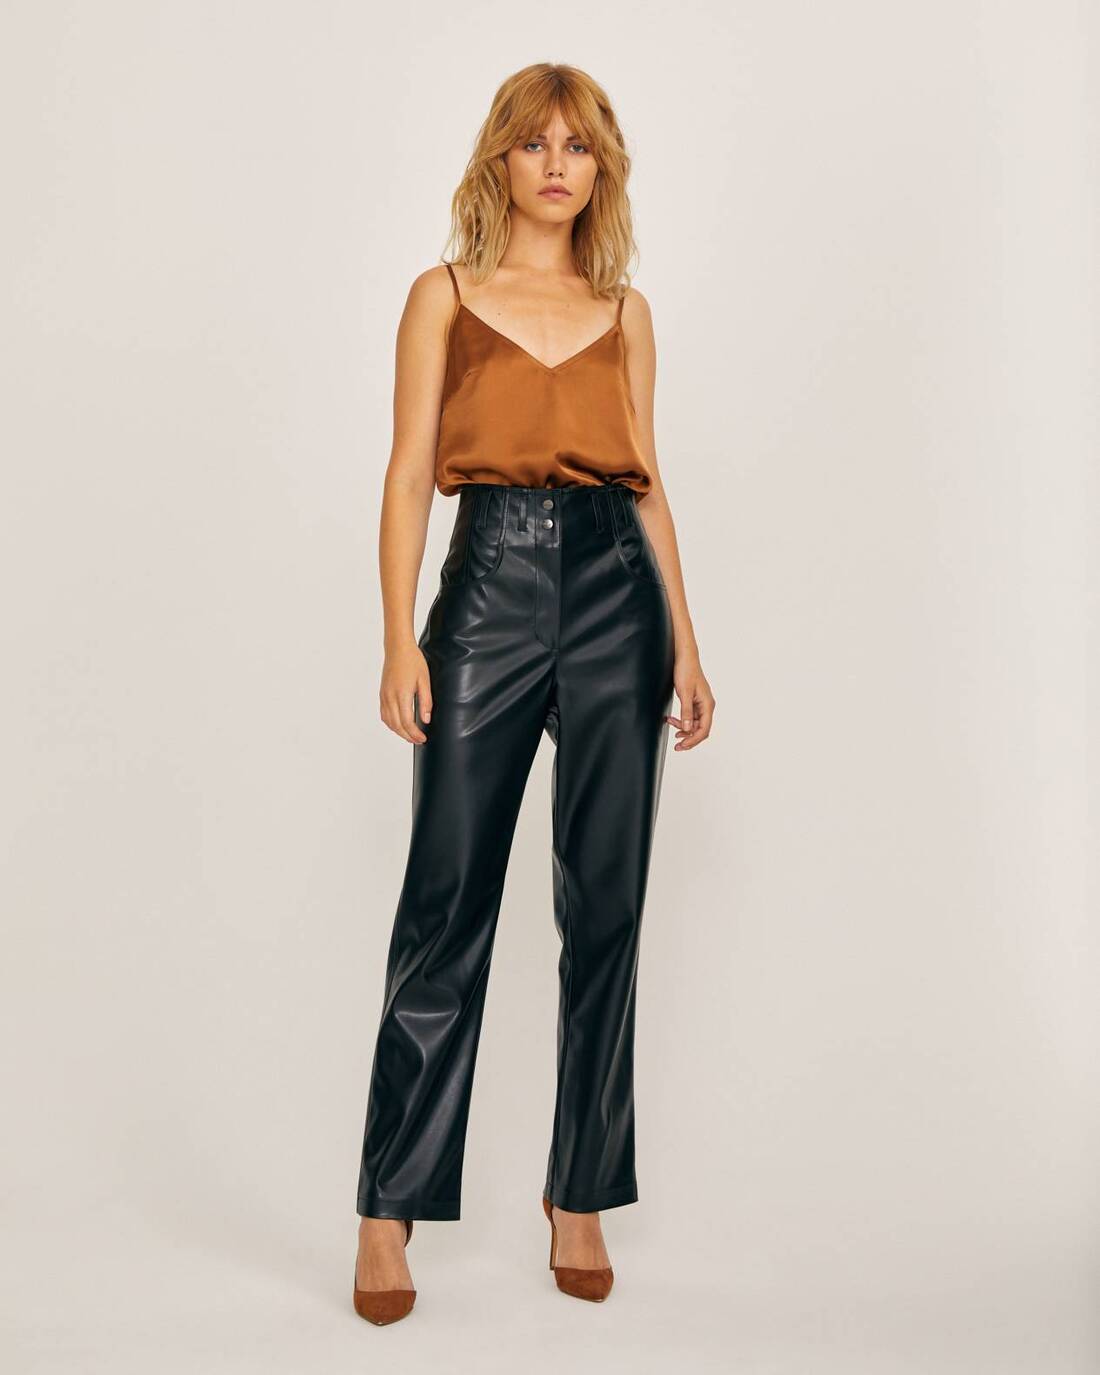 Cigarette-style pants from eco leather 